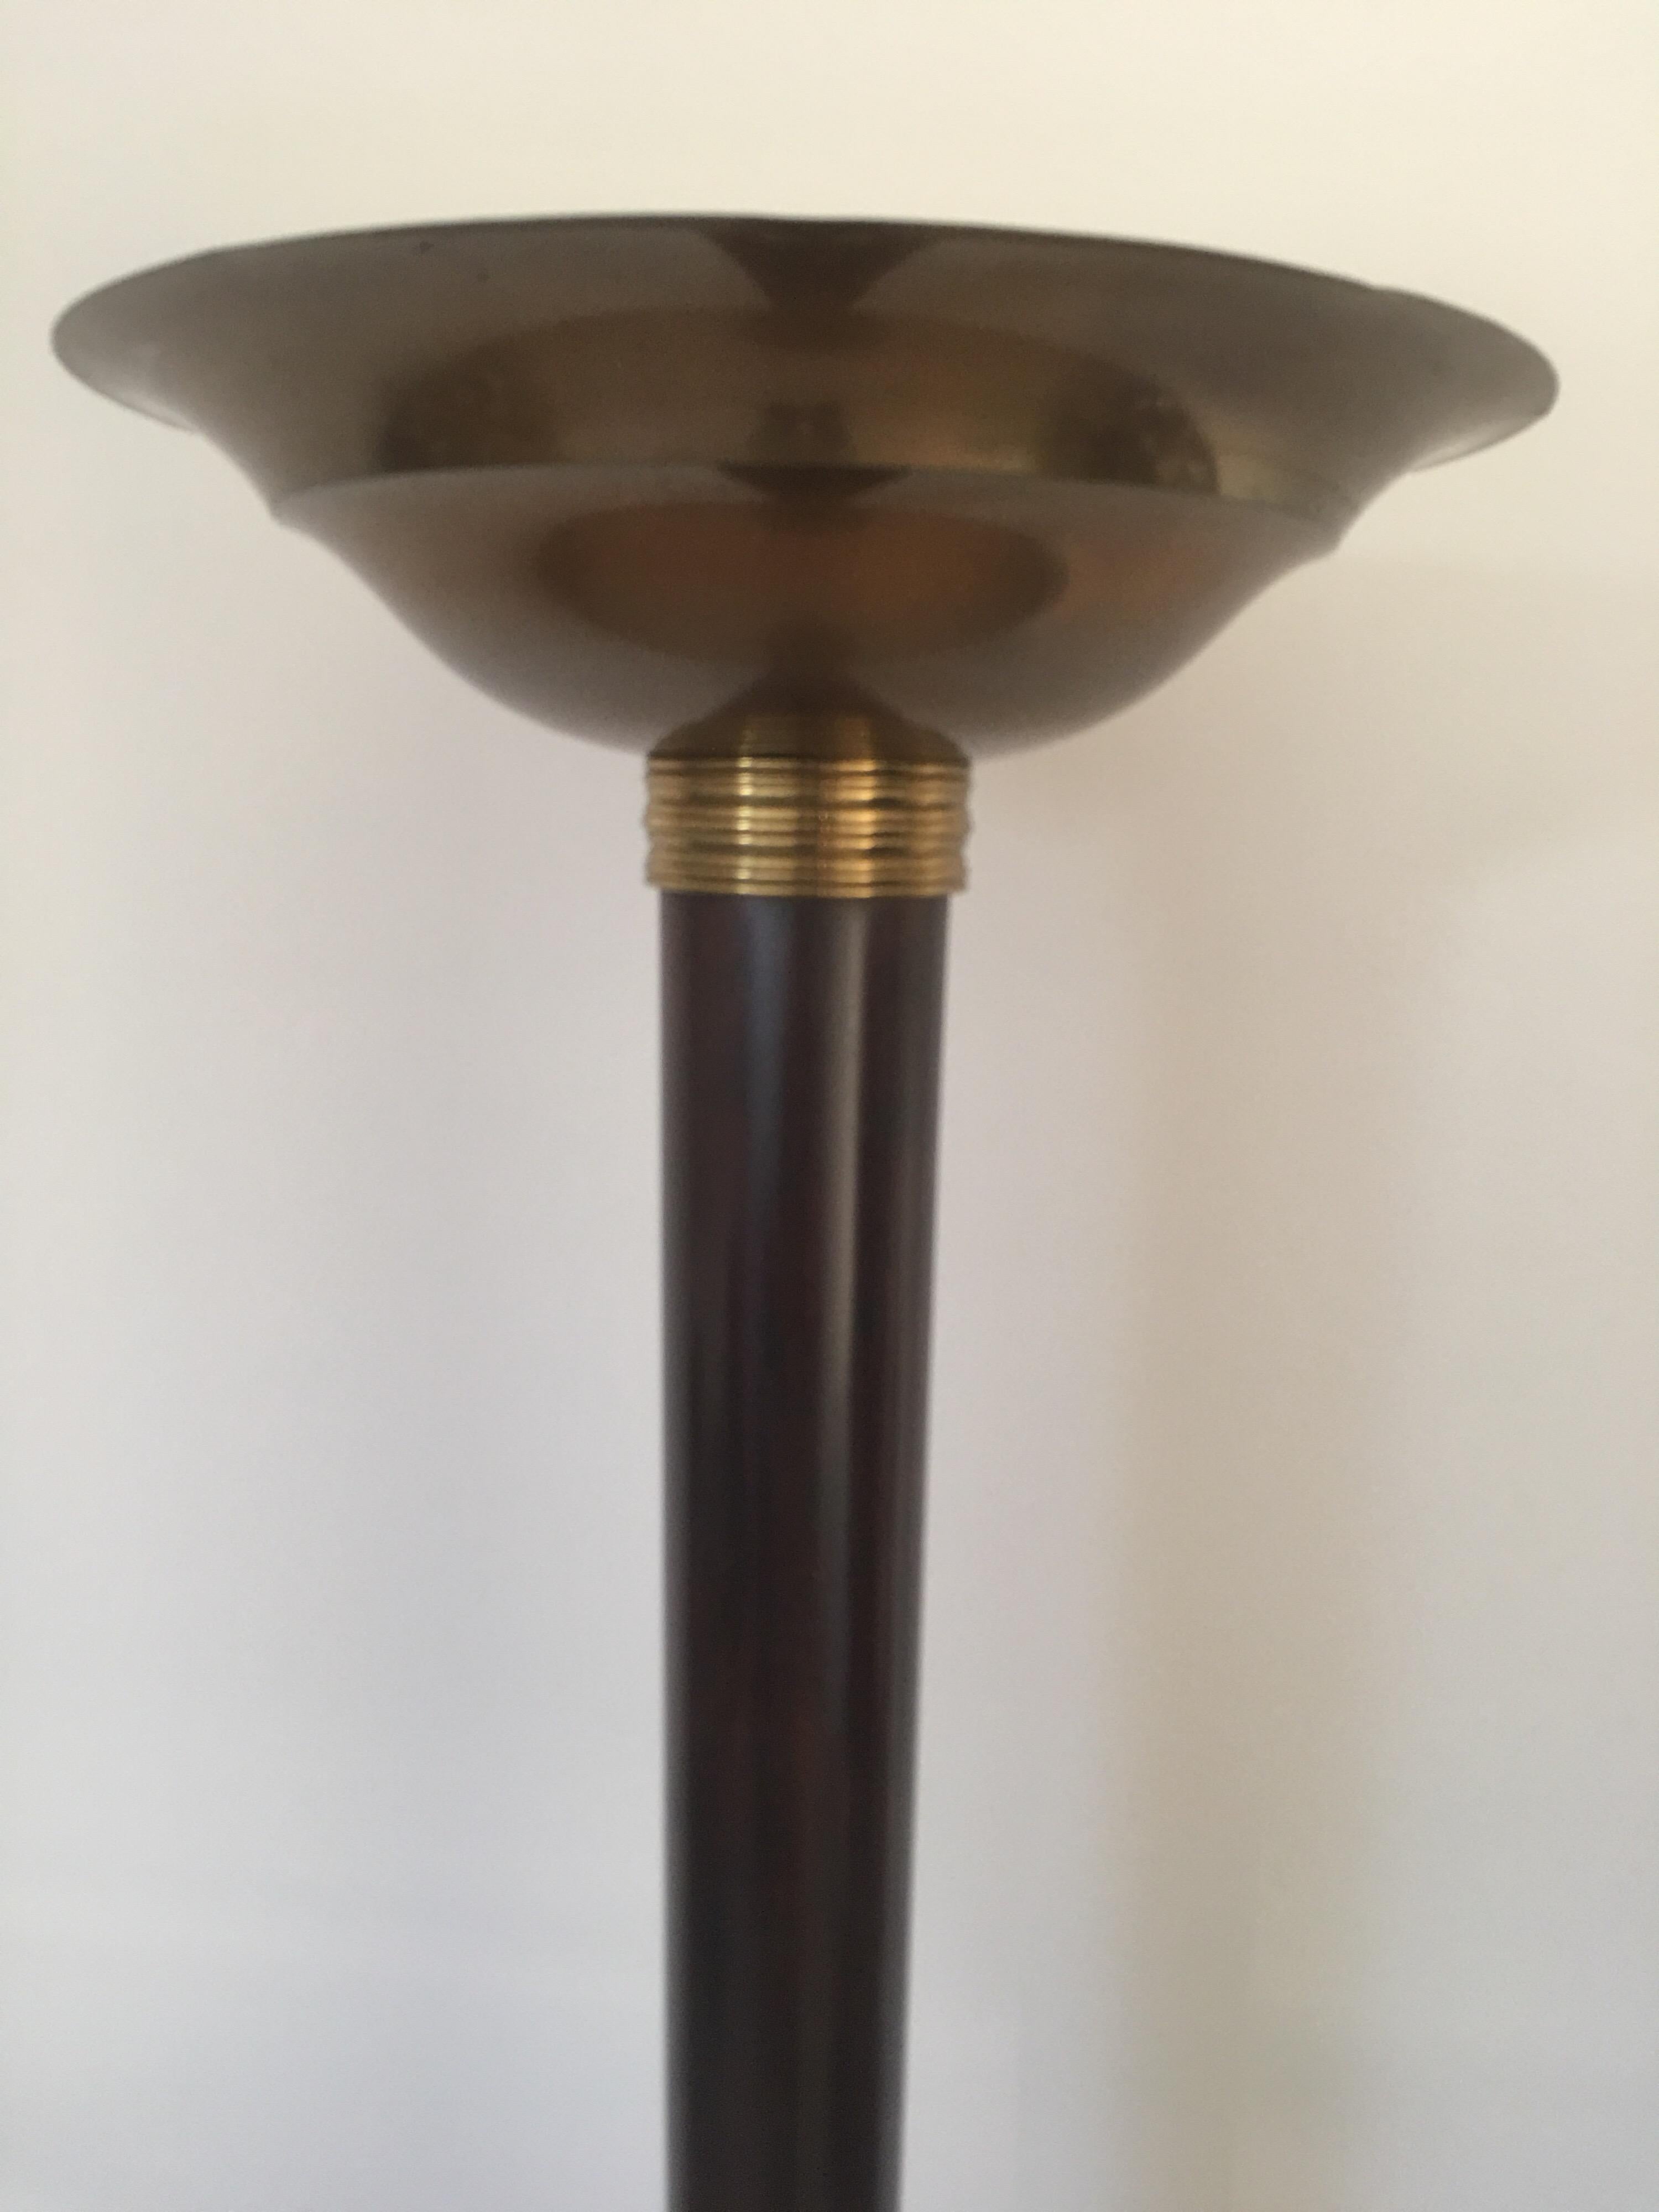 Genet et Michon Art Deco Floor Lamp in Wood and Brass, French, 1930s In Good Condition For Sale In Aix En Provence, FR